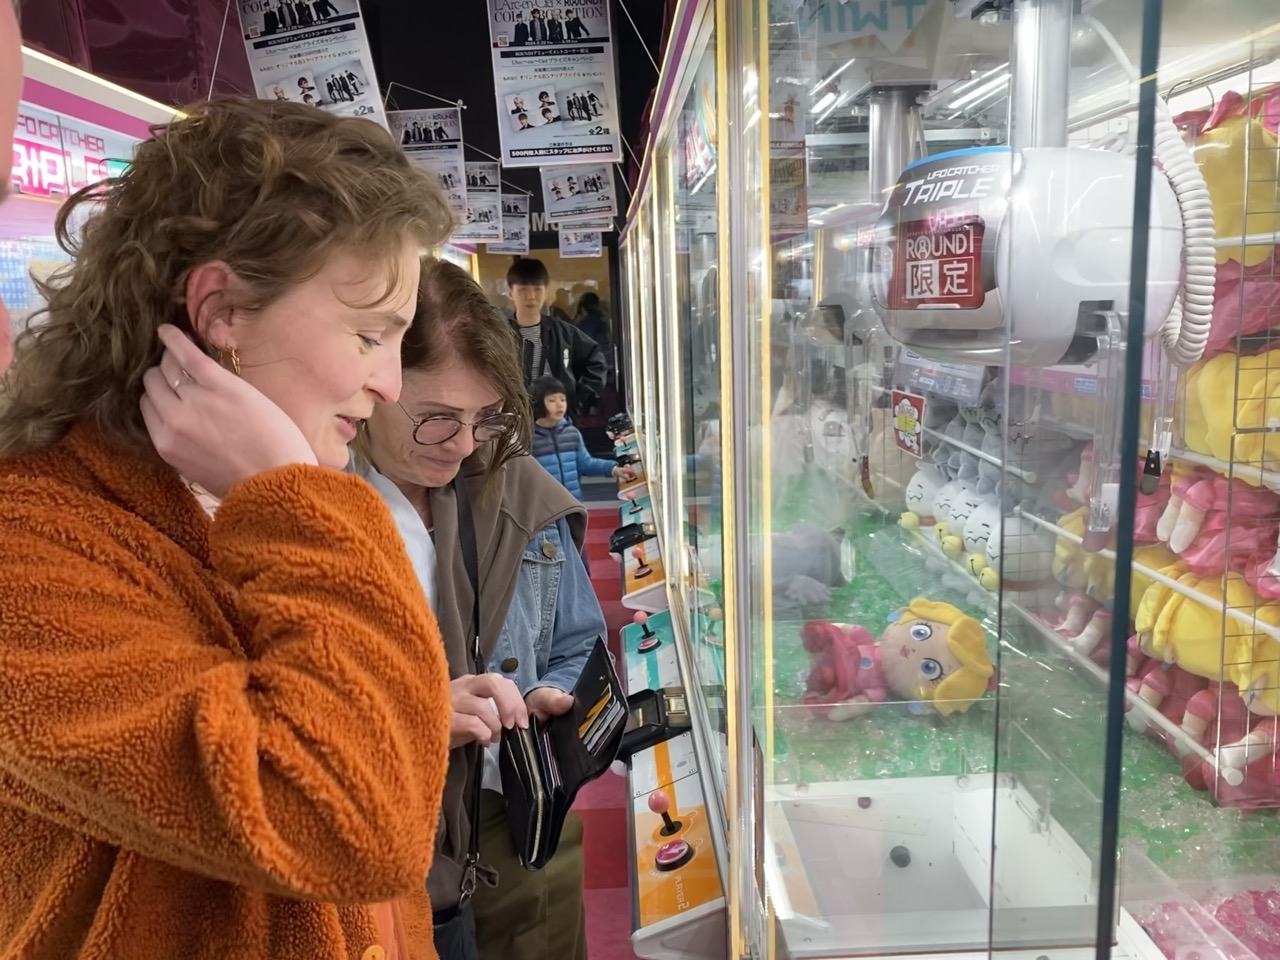 Lucy and her mum trying to win things on the claw machine